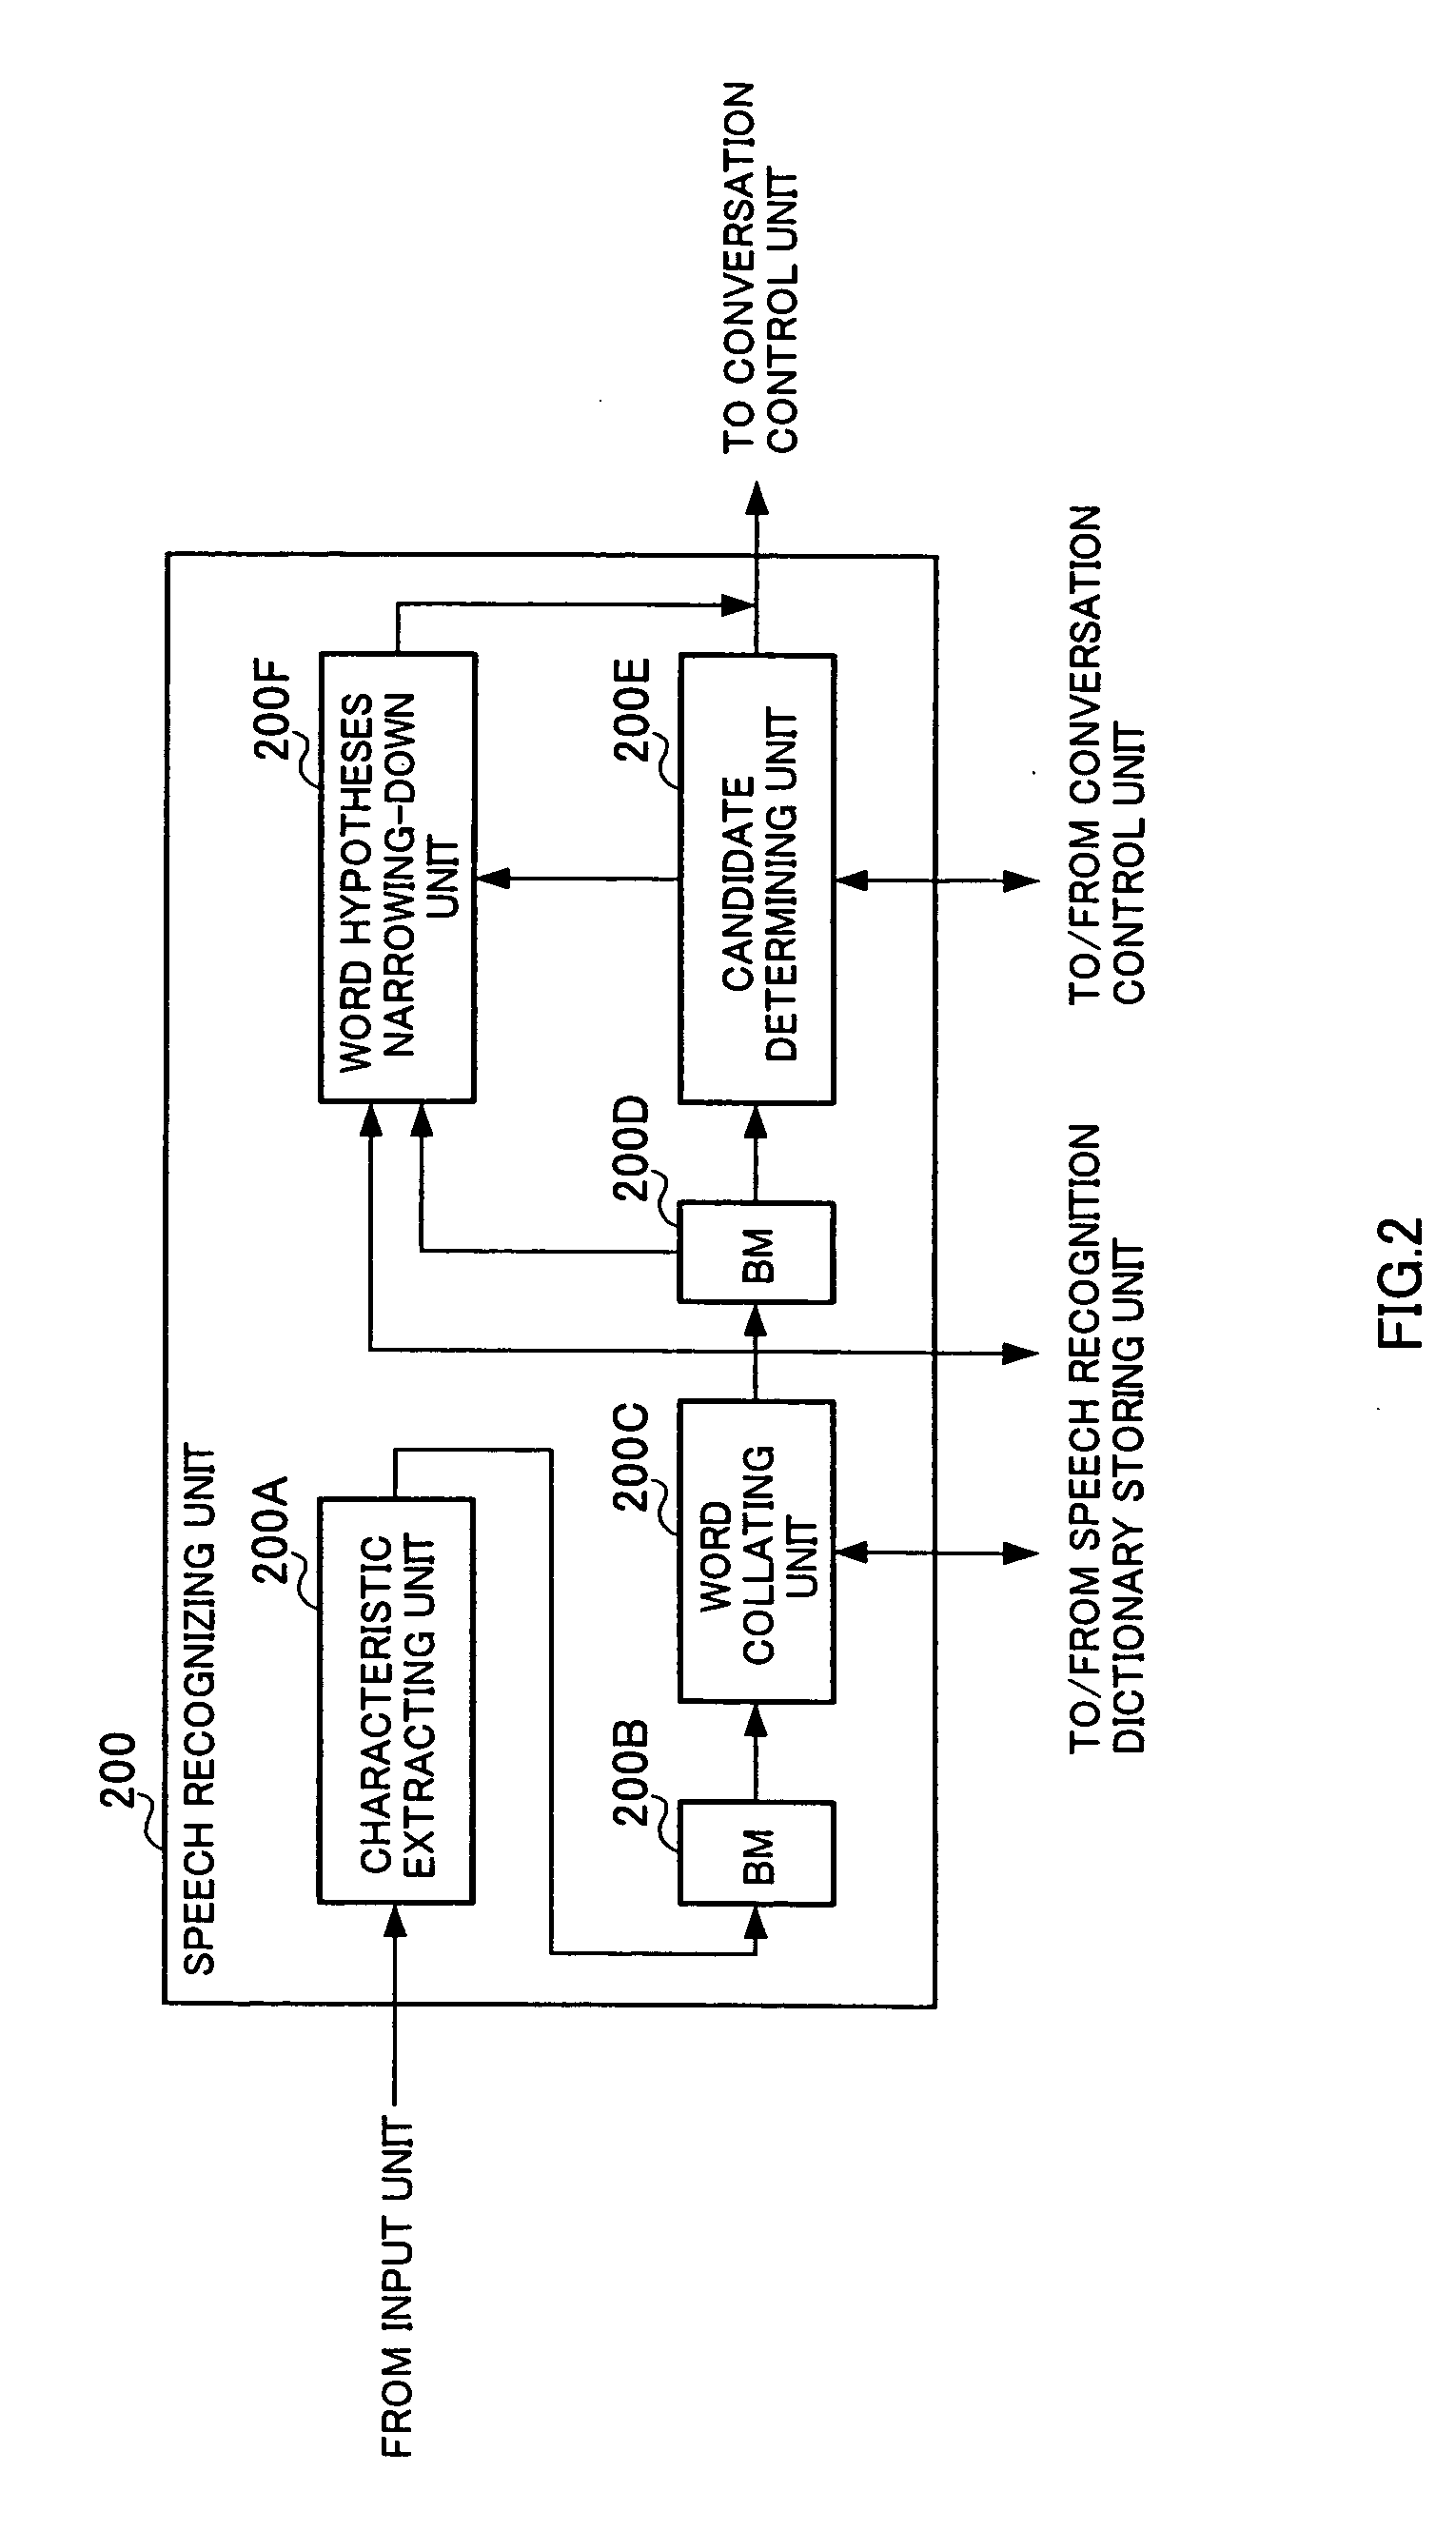 Speech recognition apparatus, speech recognition method, conversation control apparatus, conversation control method, and programs for therefor